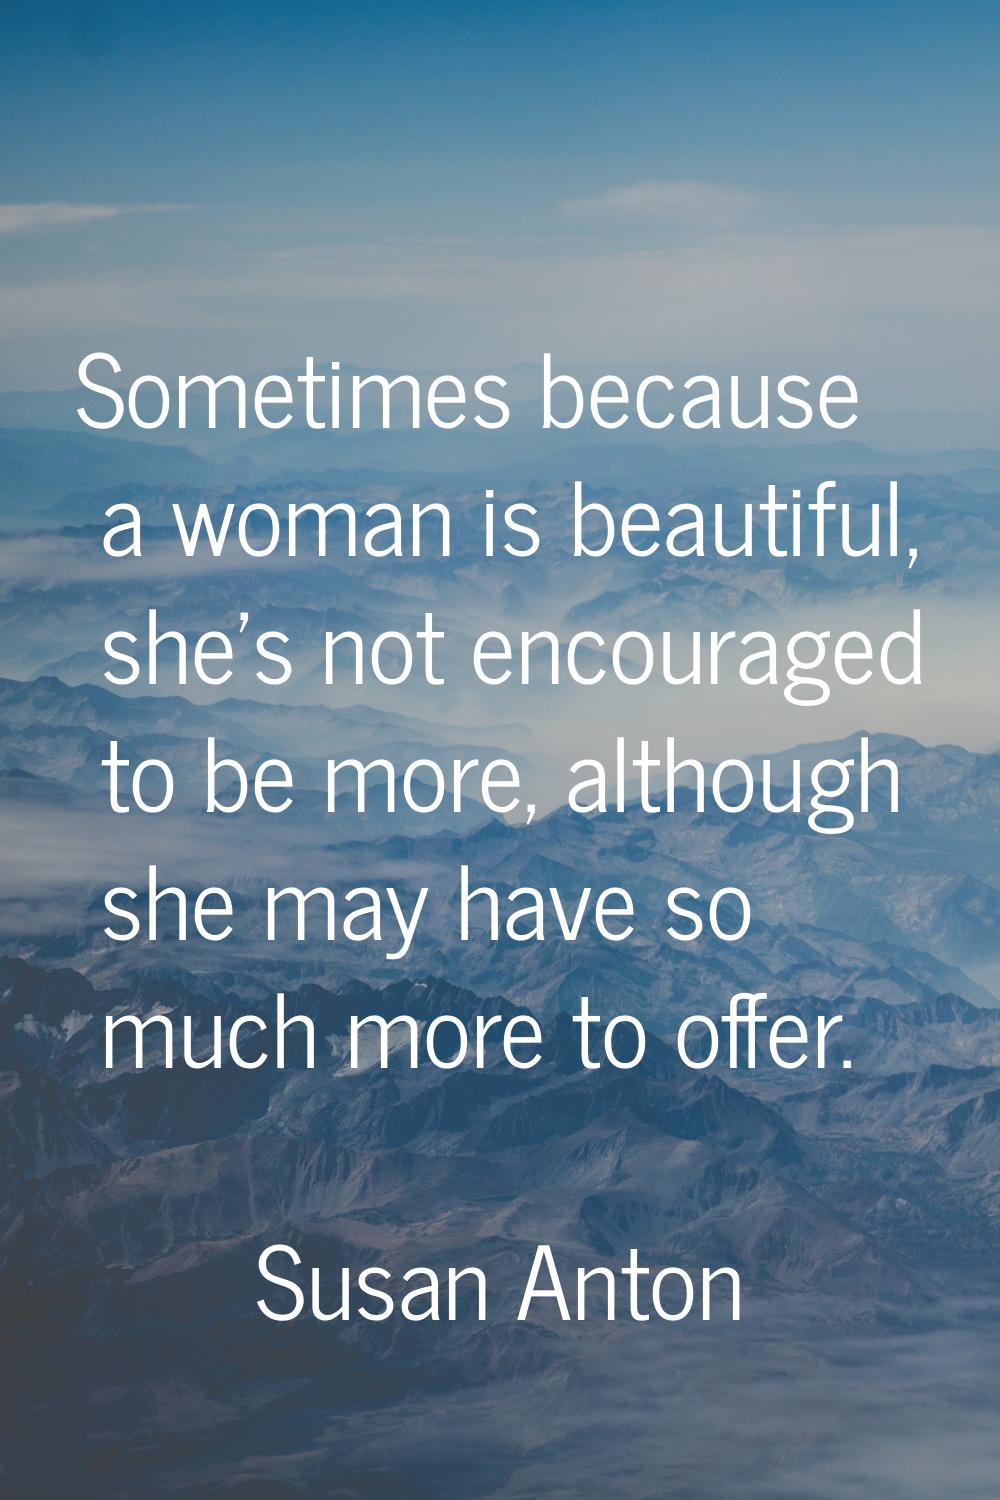 Sometimes because a woman is beautiful, she's not encouraged to be more, although she may have so m